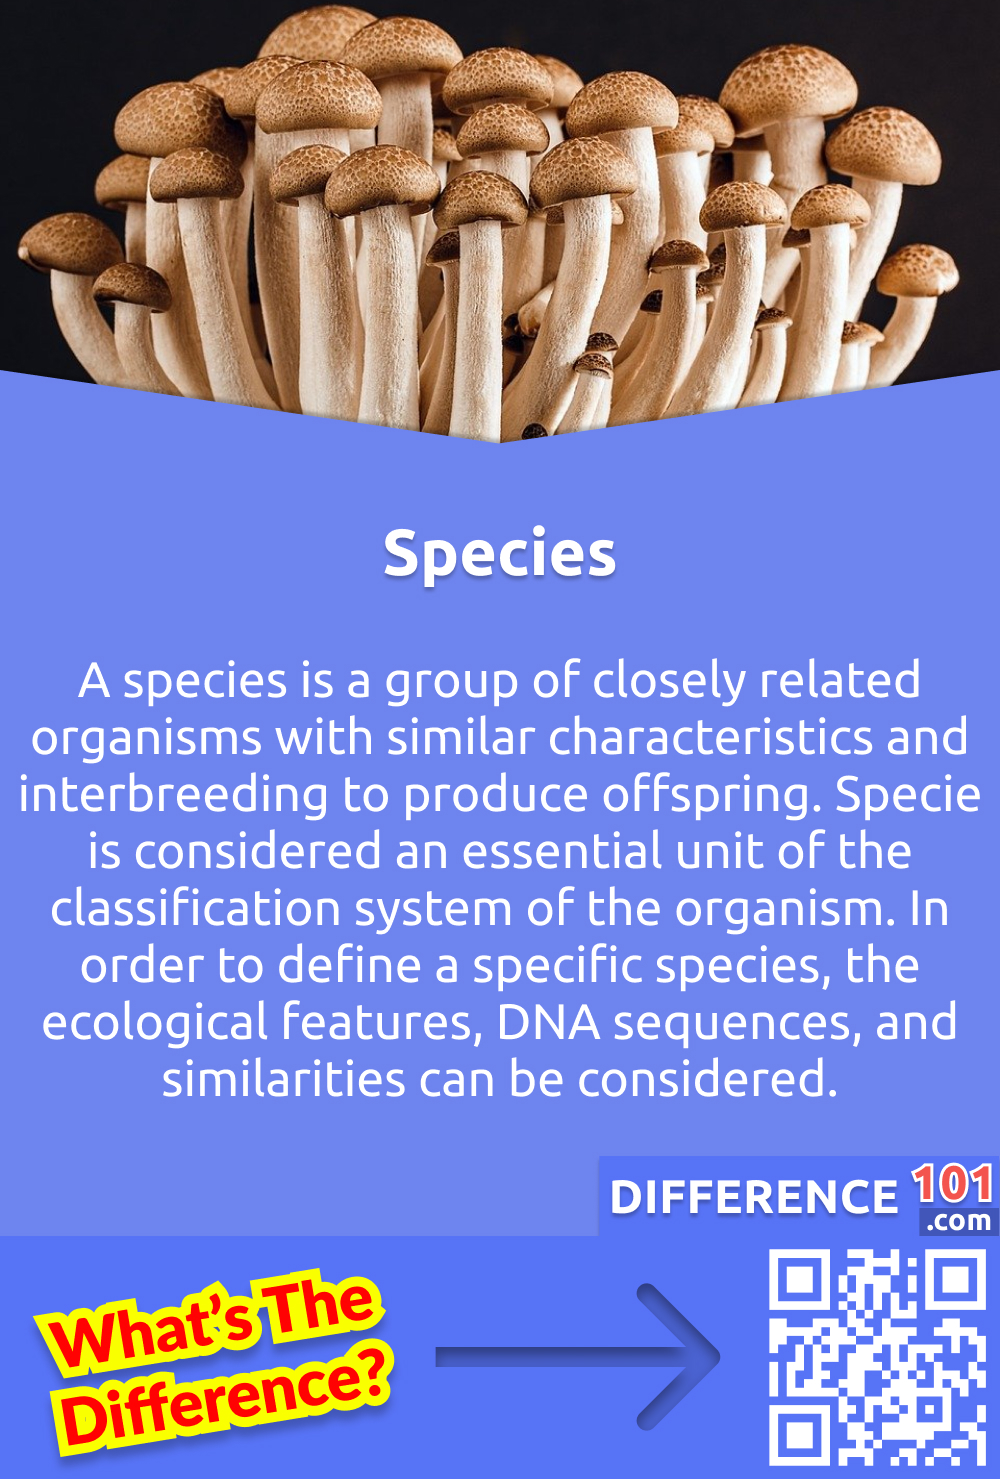 What Is Species? A species is a group of closely related organisms with similar characteristics and interbreeding to produce offspring. Specie is considered an essential unit of the classification system of the organism. In order to define a specific species, the ecological features, DNA sequences, and similarities can be considered.